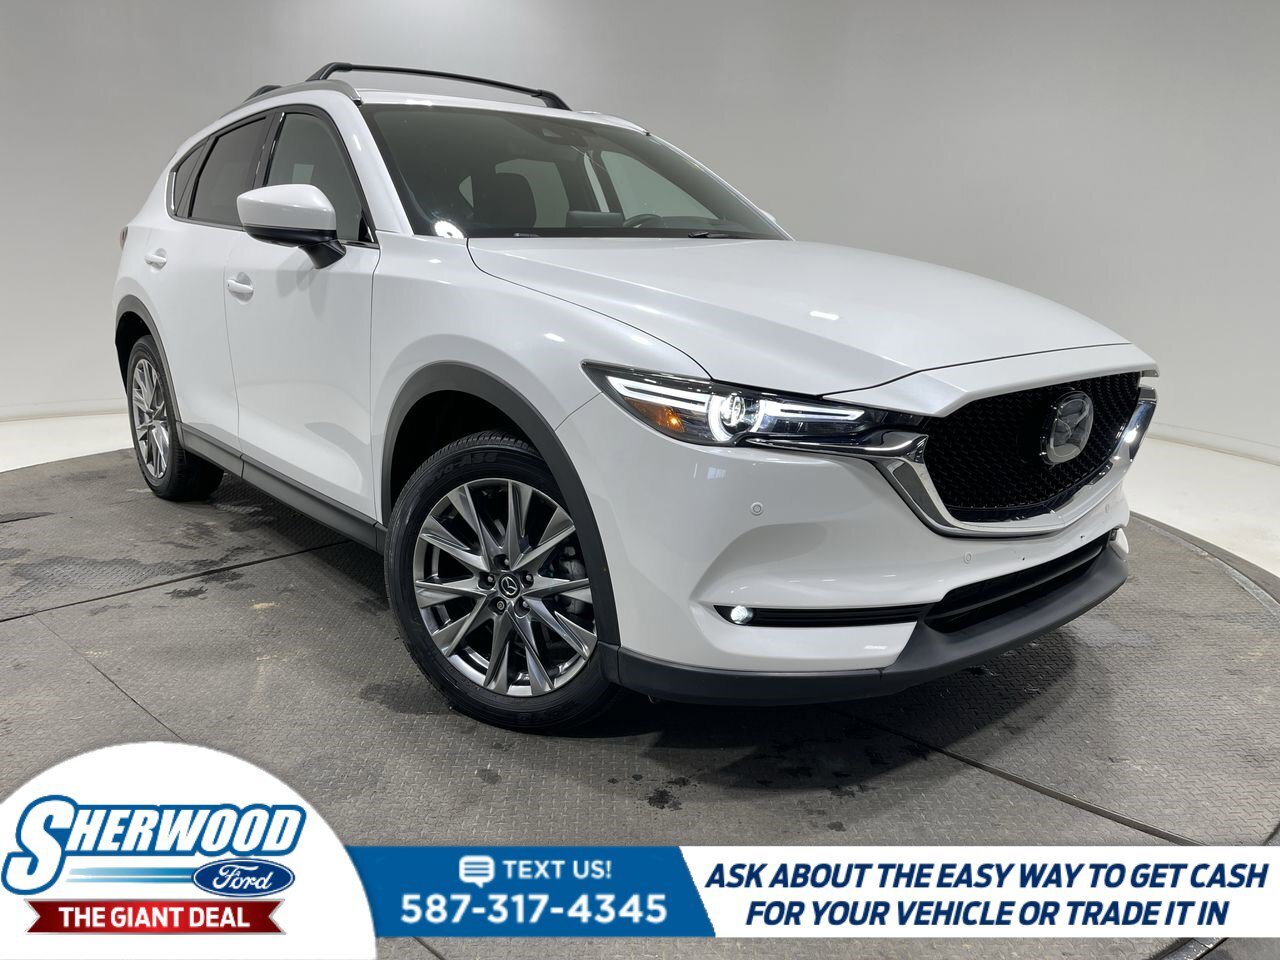 2021 Mazda CX-5 SIGNATURE- $0 Down $165 Weekly- TWO SETS OF TIRES